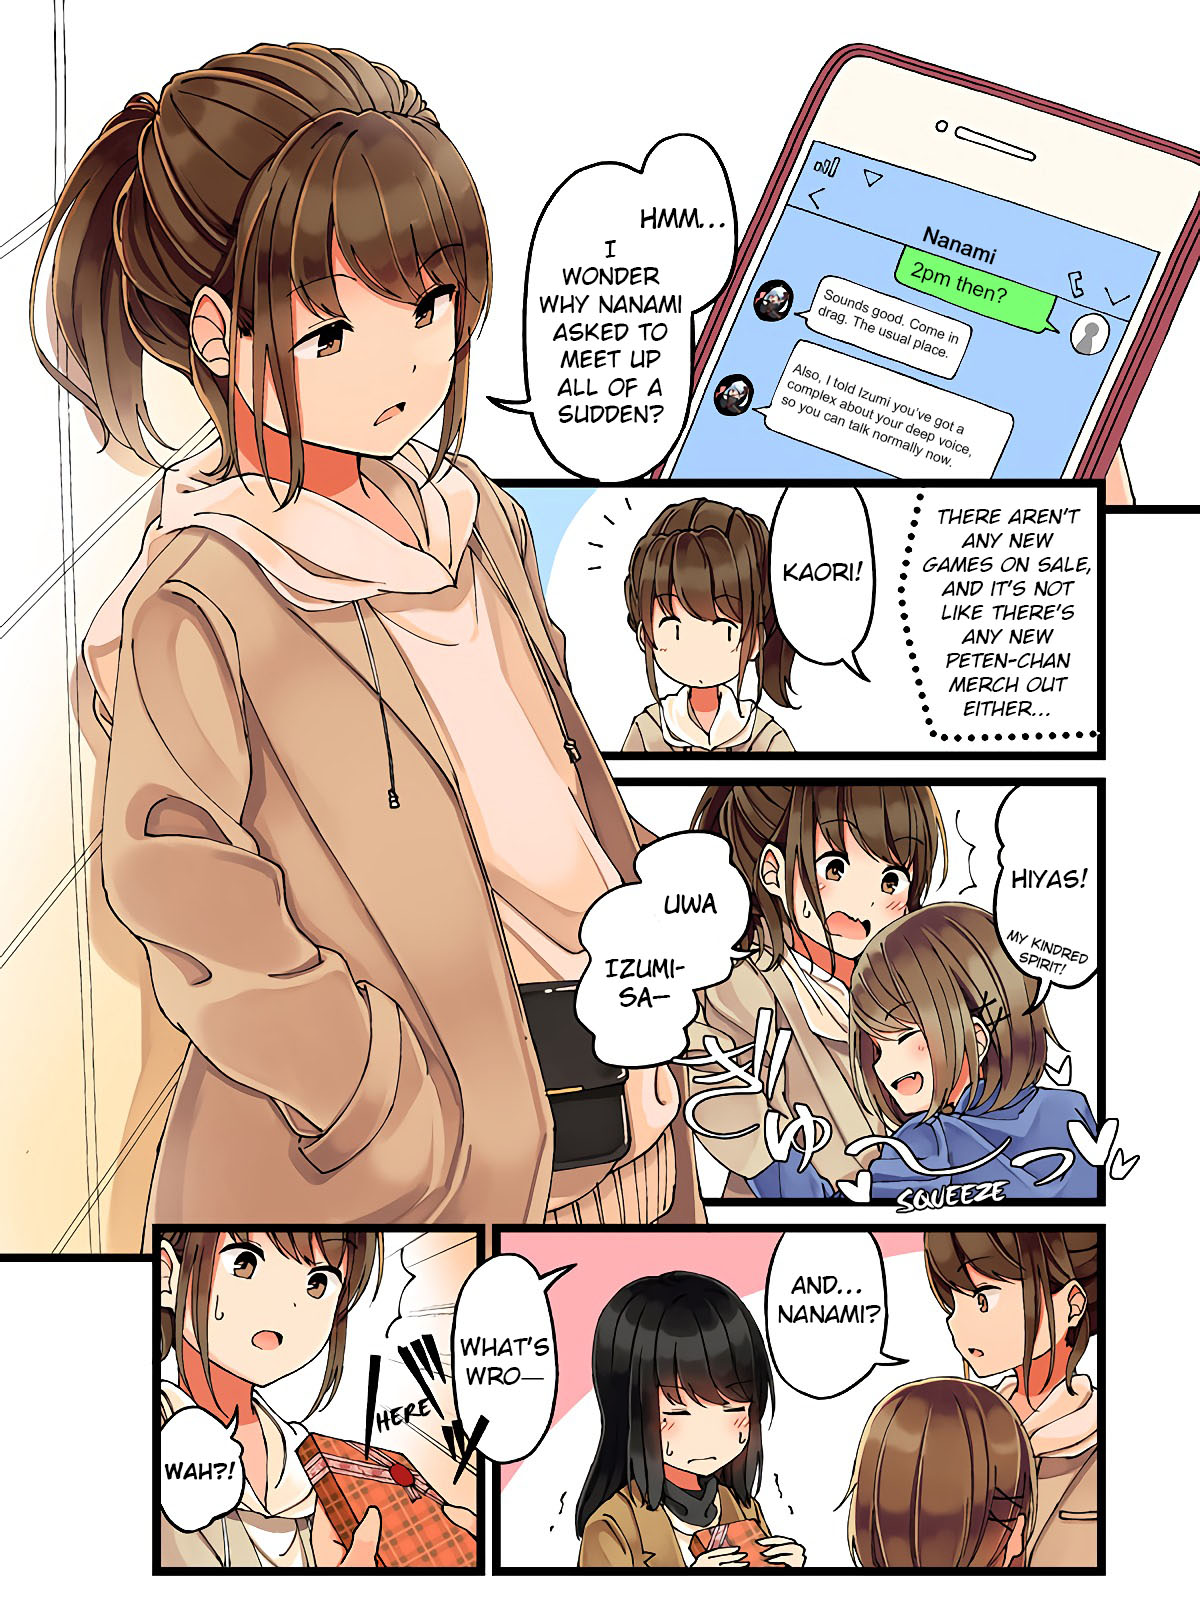 Hanging Out with a Gamer Girl Ch. 17 I Get Chocolate From My Gamer Friend